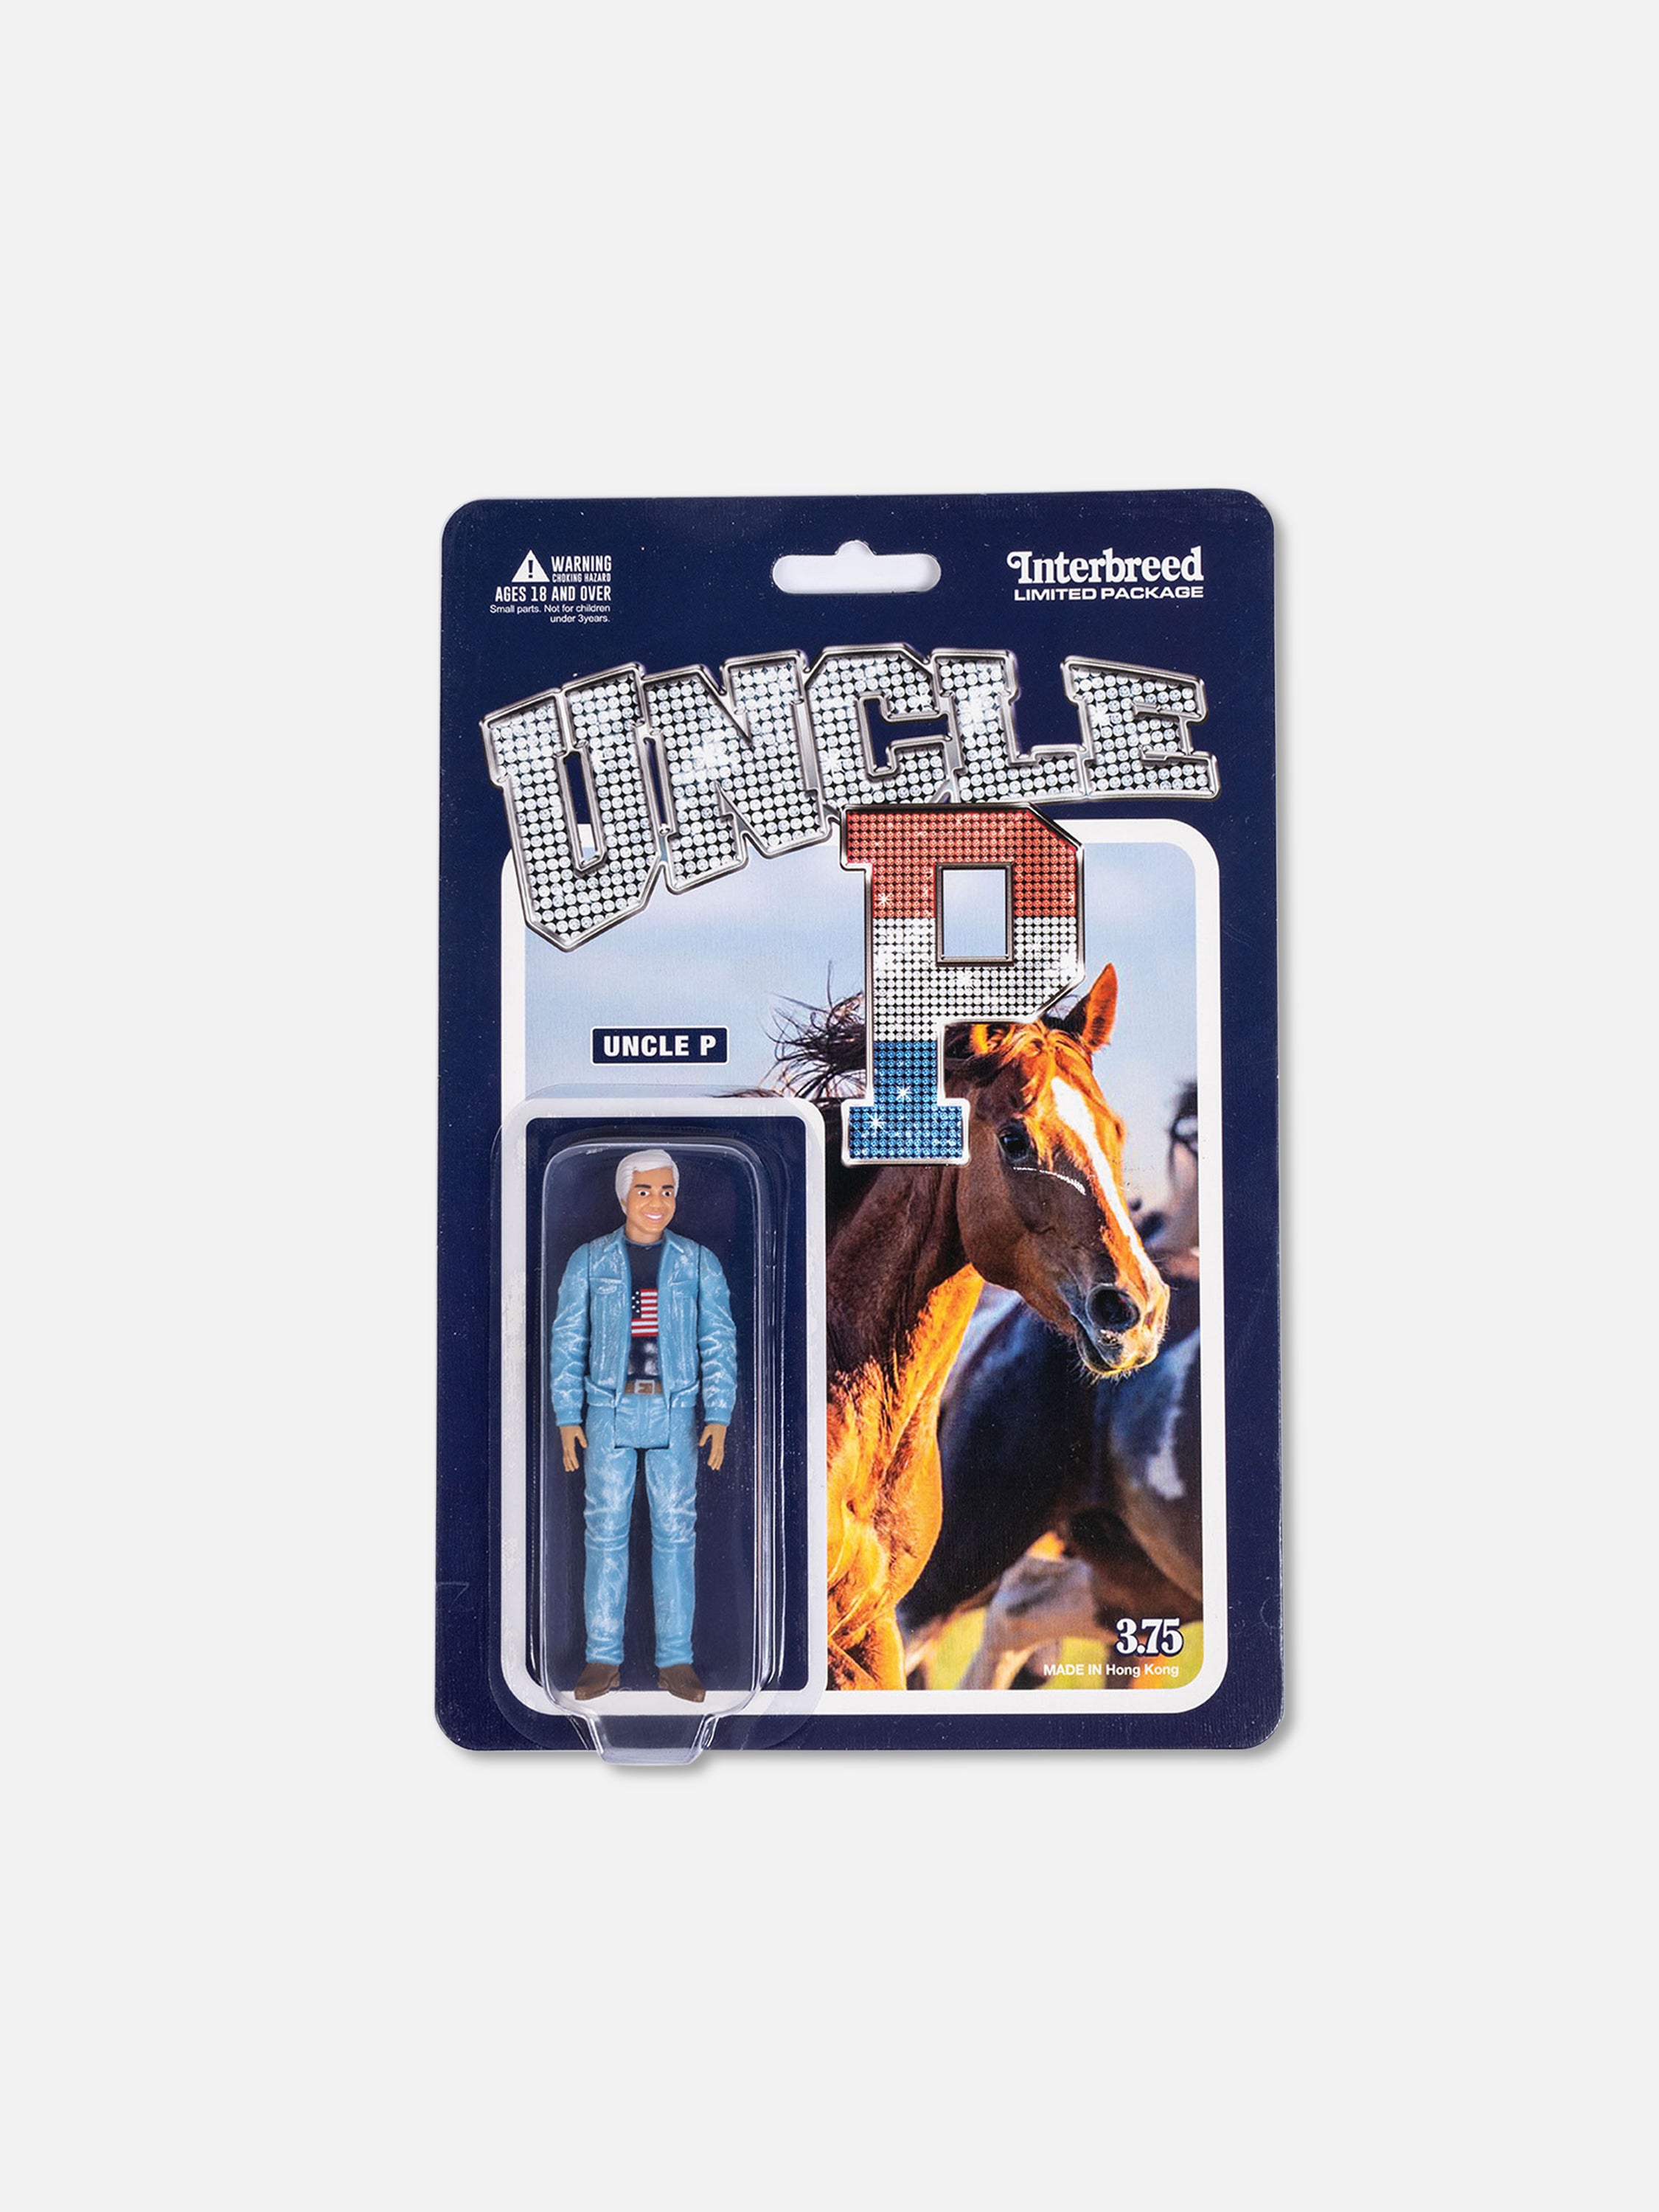 UNCLE P Action Figure -INTERBREED Edition-